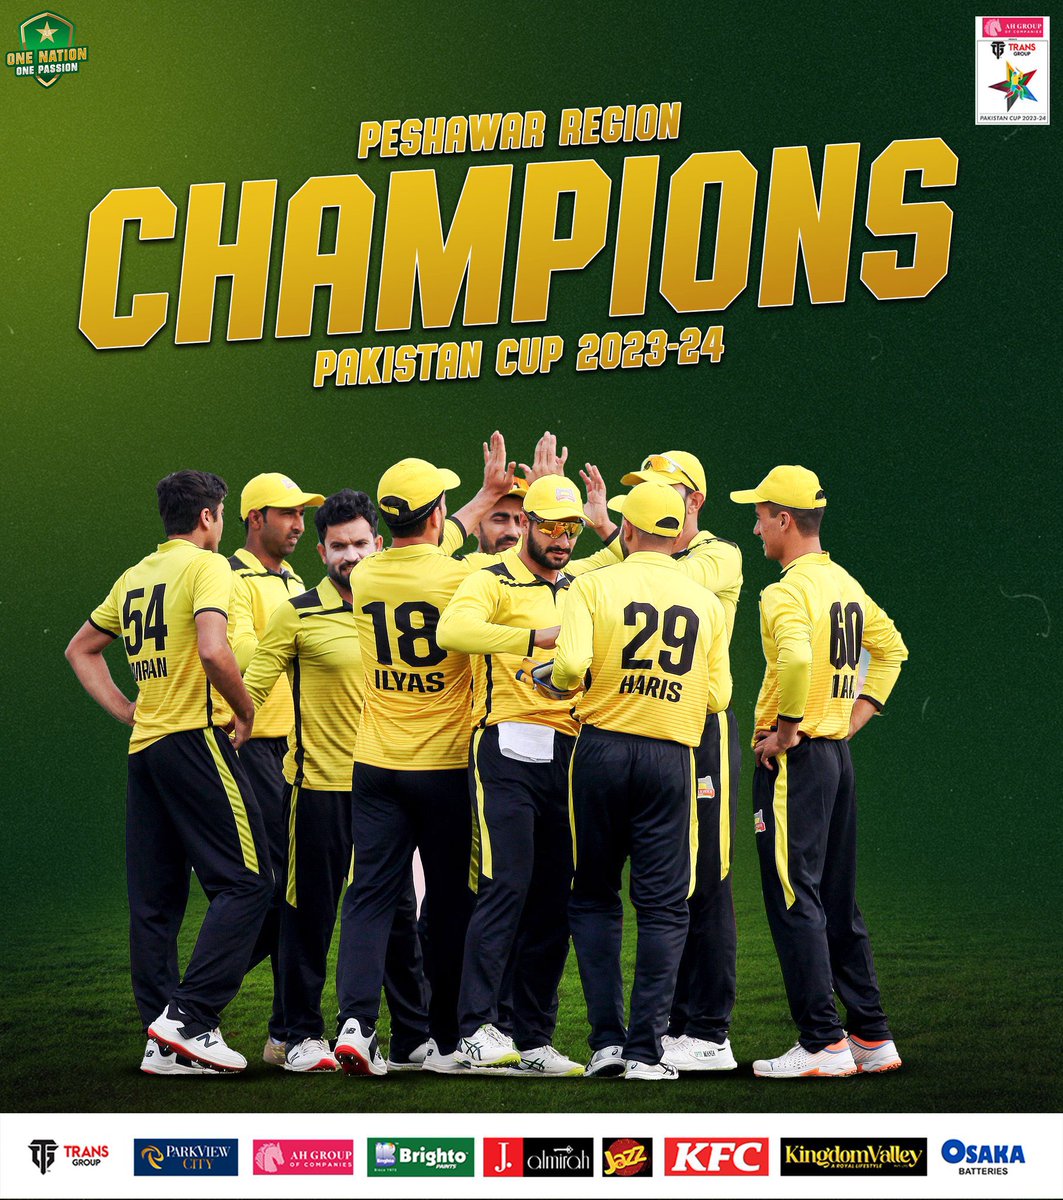 Congratulations to the entire Peshawar team for lifting another Pakistan Cup title 🇵🇰 Well done to the team especially Sahibzada Farhan for leading from the front and efforts of head coach Arshad Khan and whole management reaping rewards 👏👏👏